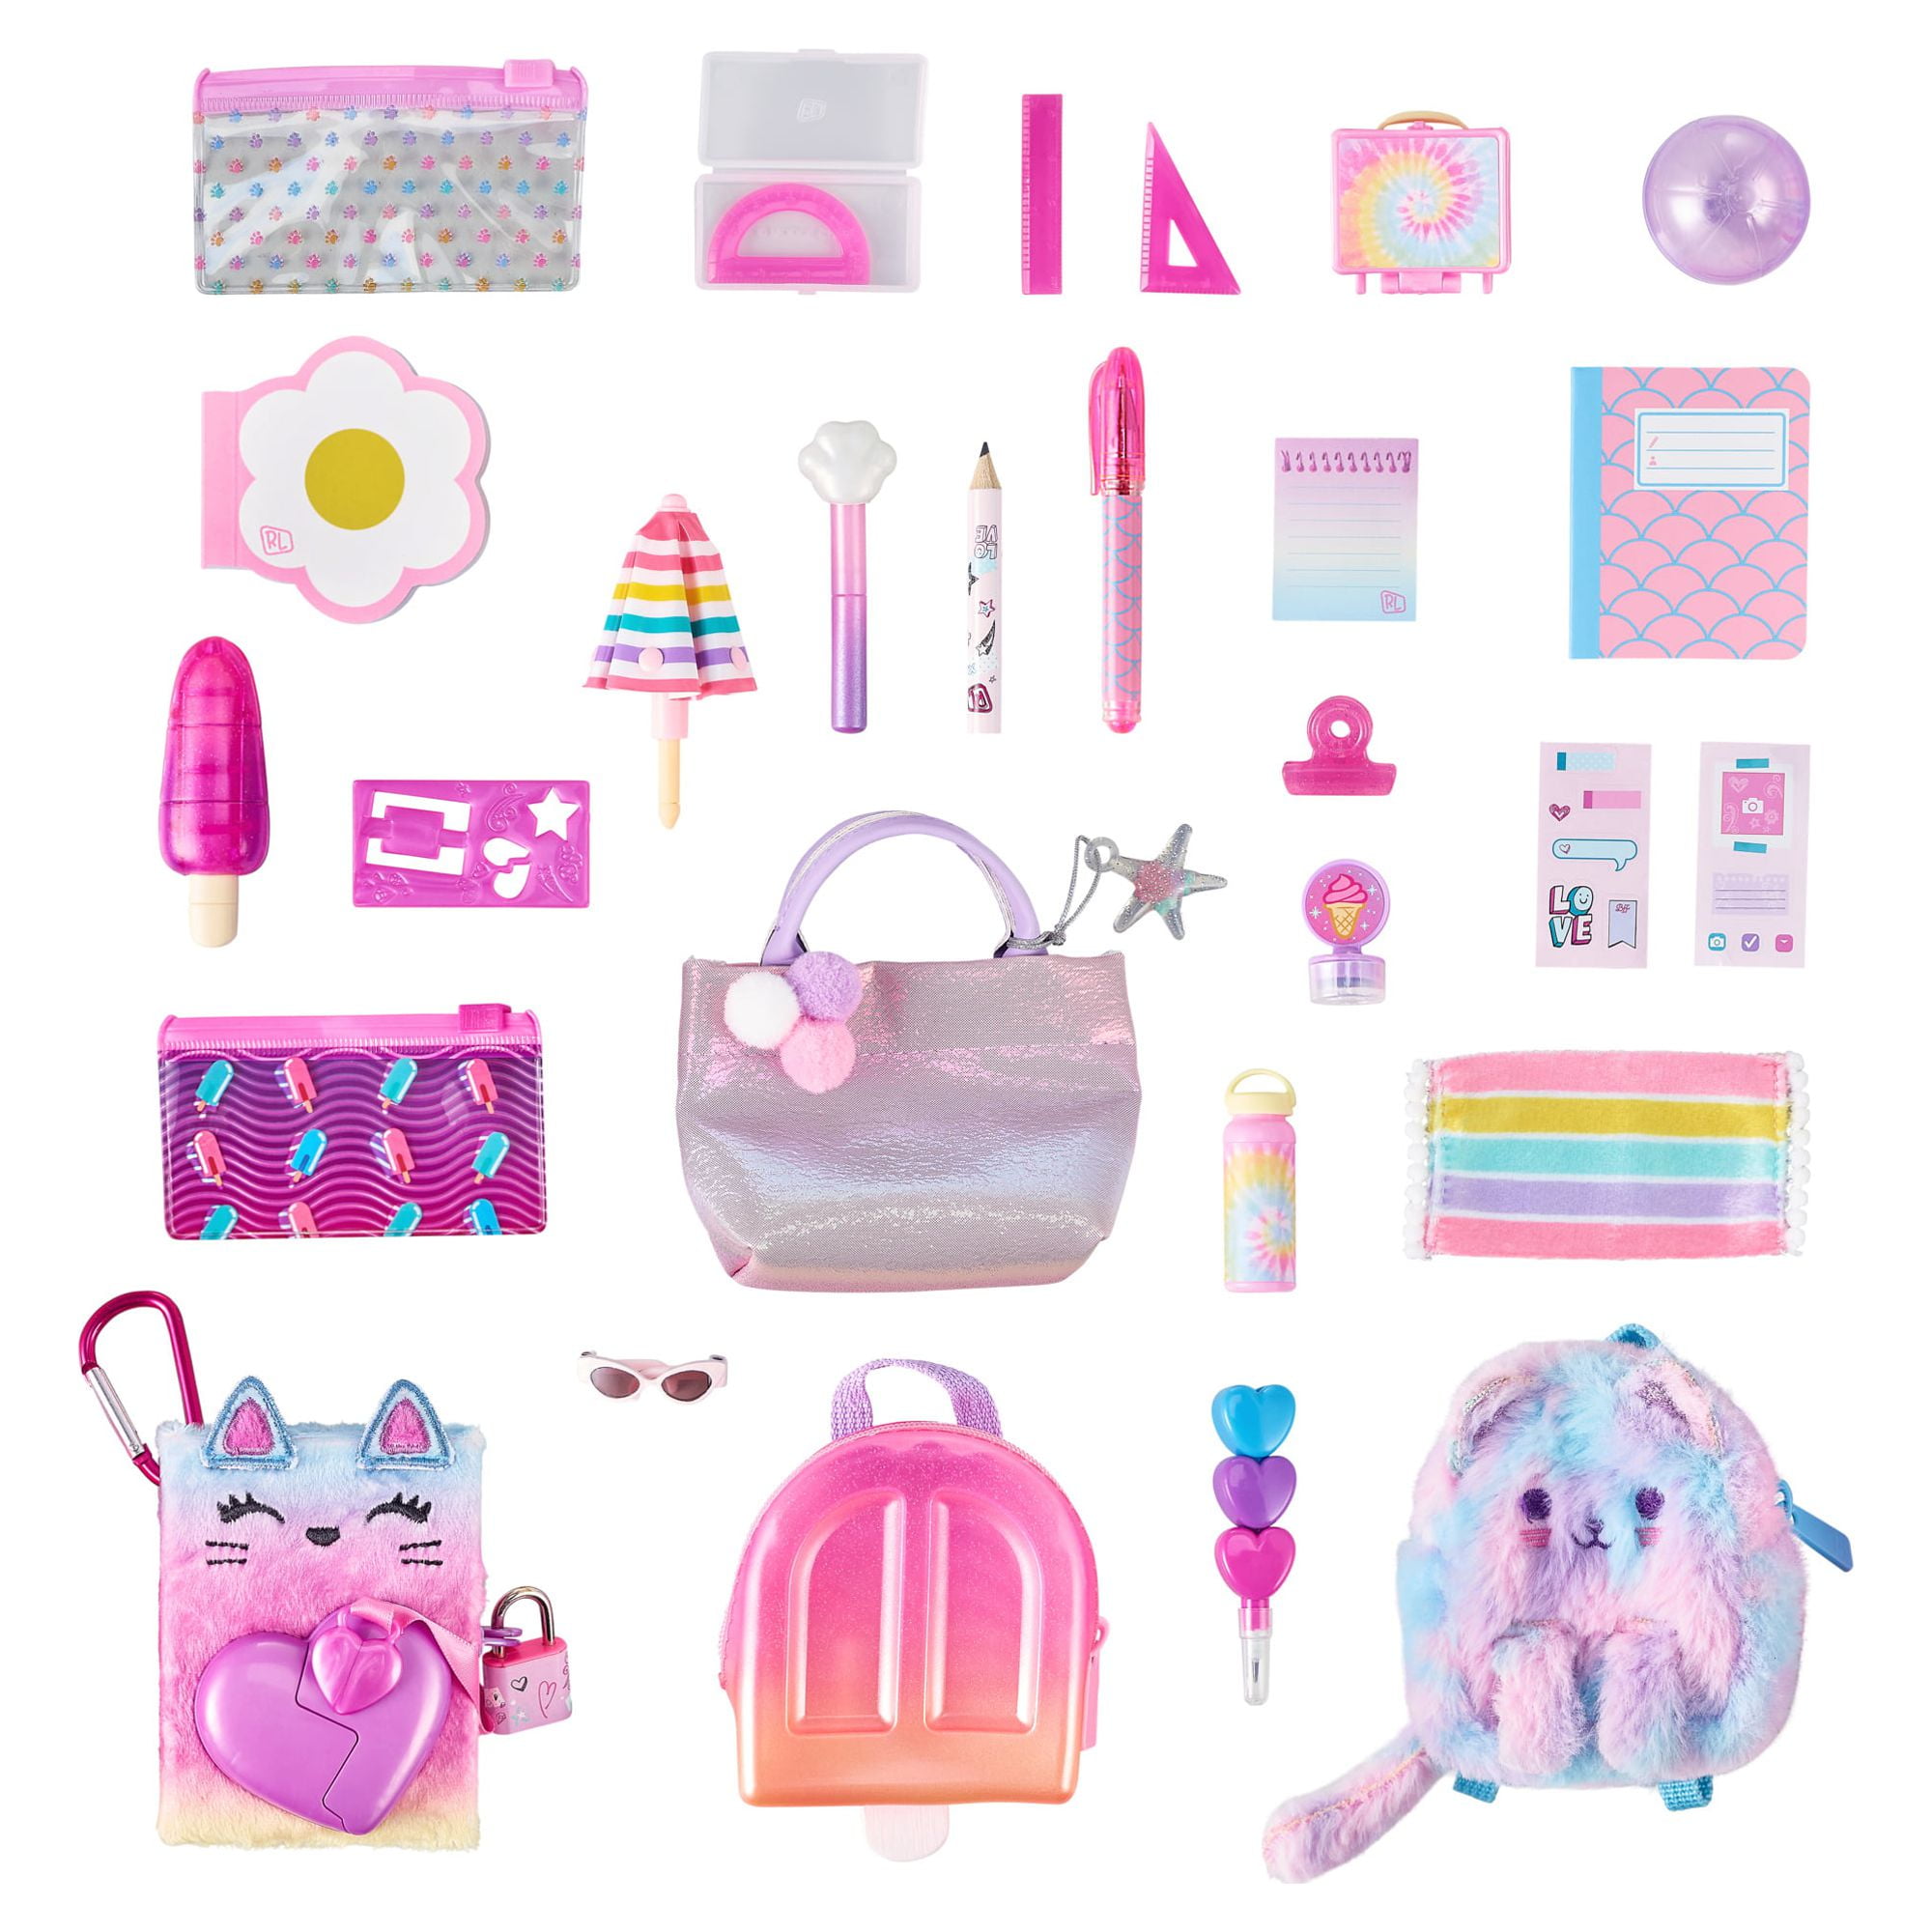 Real Littles - Collectible Micro Backpack and Micro Handbag with 12 Micro Working Surprises inside!, Multicolor (25324)